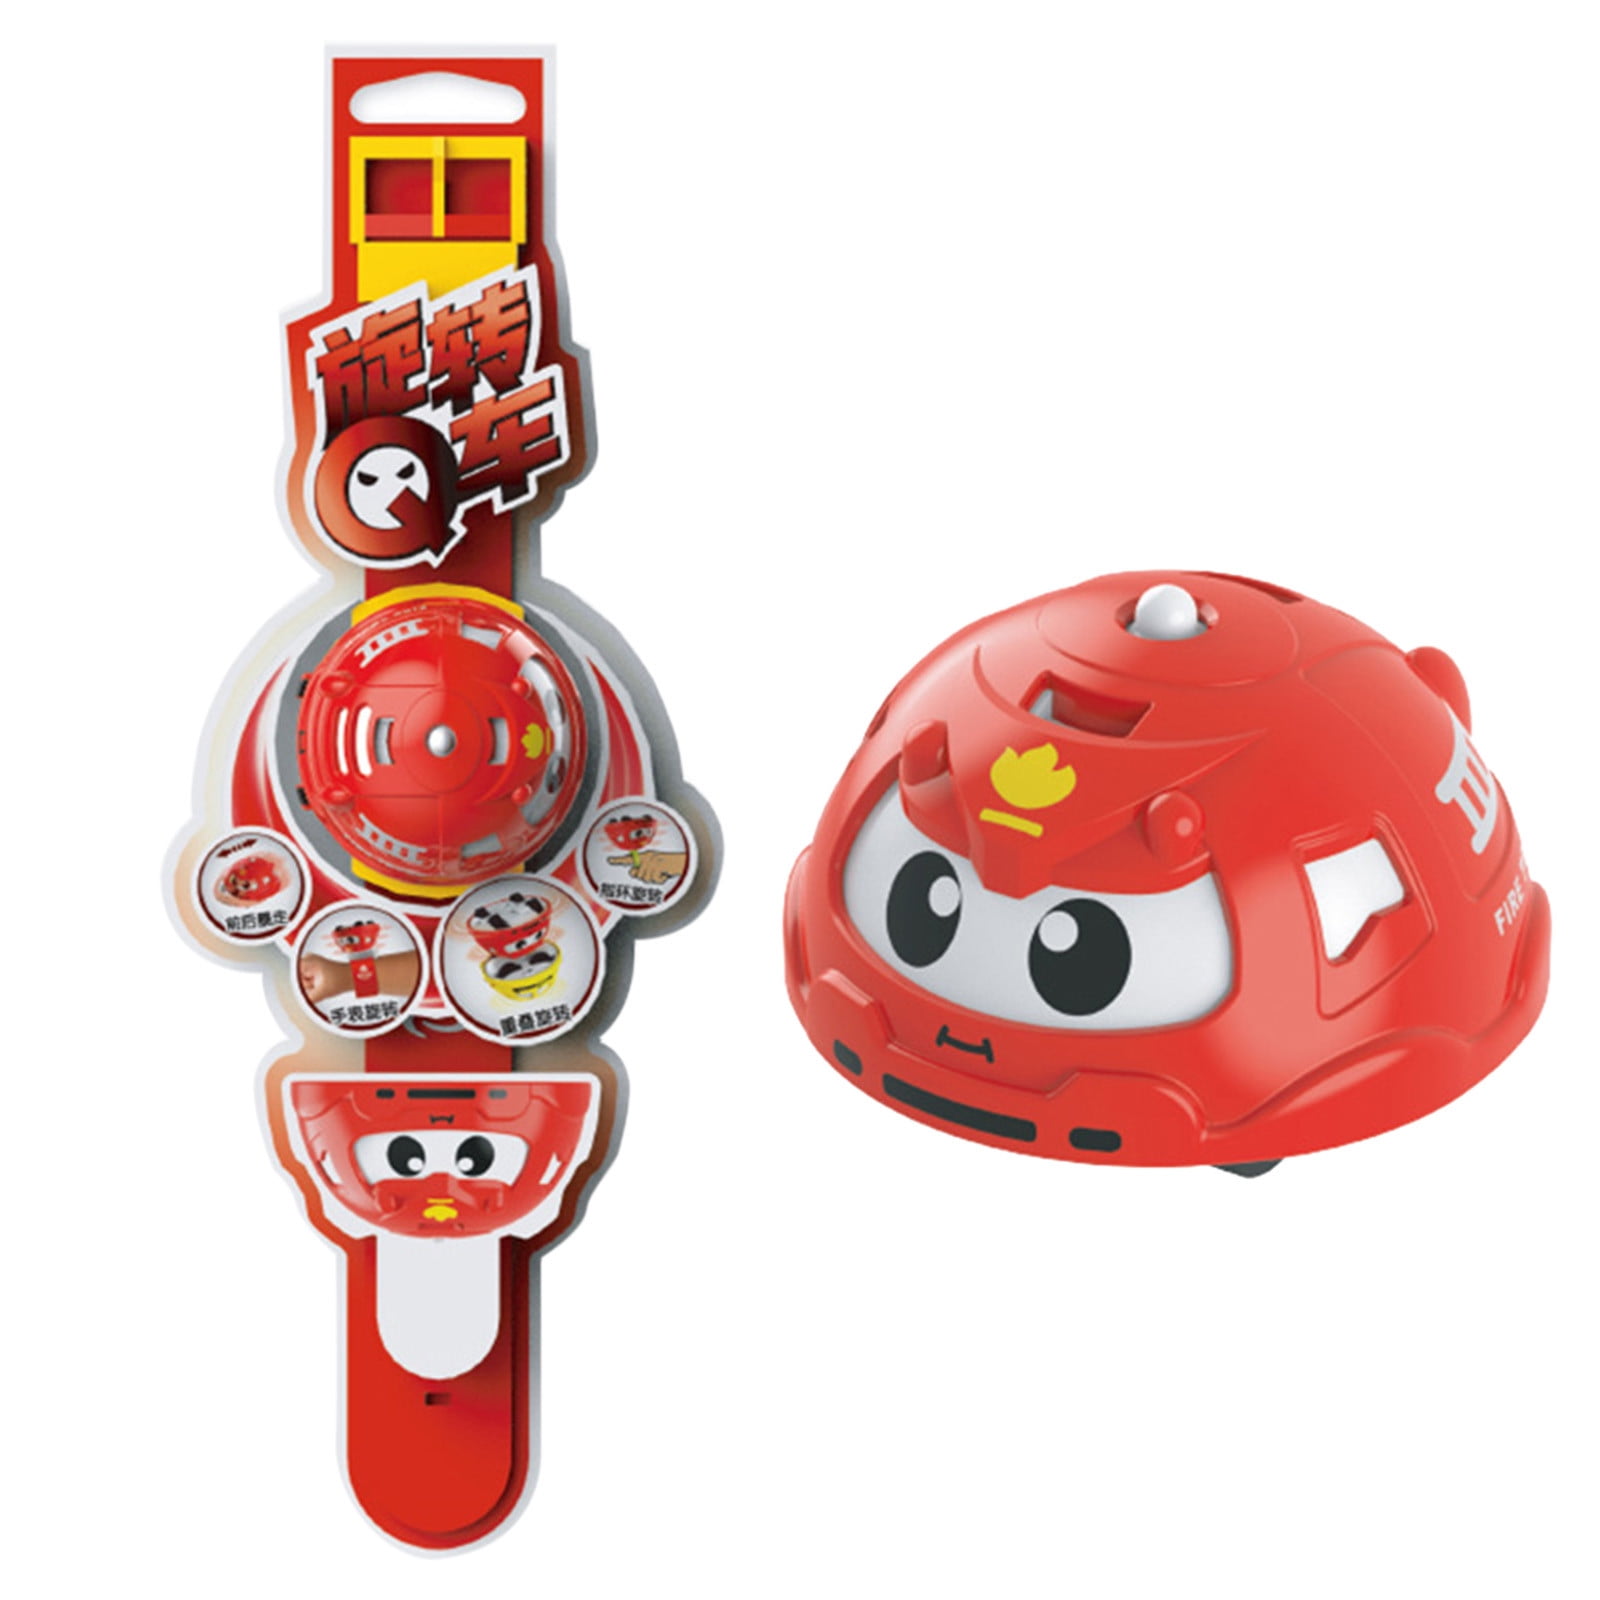 vikakiooze-toys-under-5-gift-kids-watch-toys-for-3-9-year-old-boys